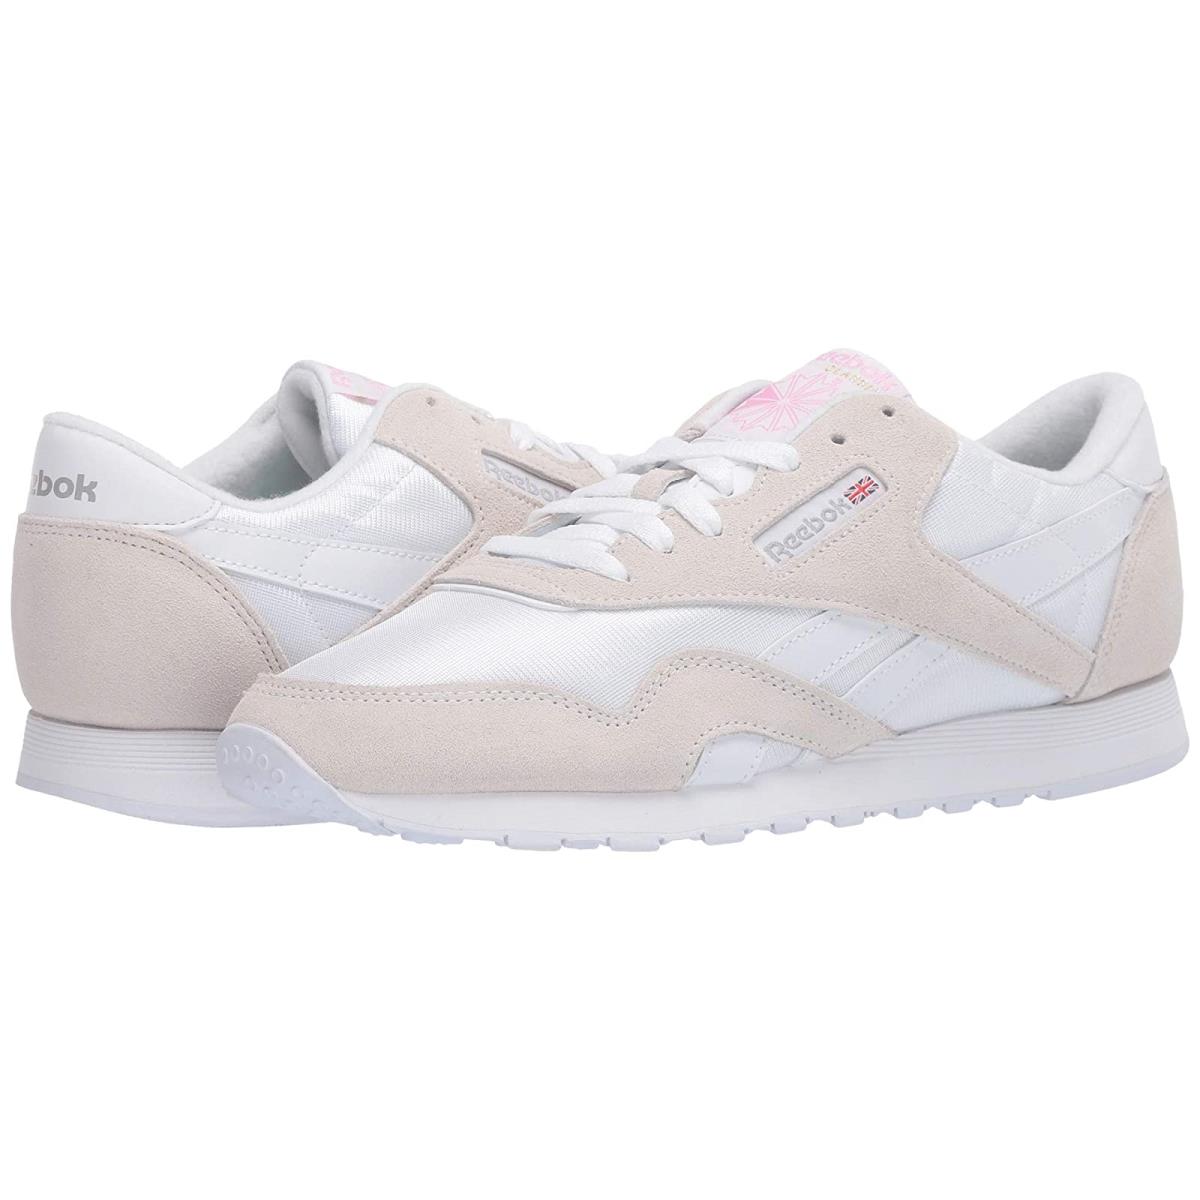 Woman`s Sneakers Athletic Shoes Reebok Lifestyle Classic Nylon White/Light Grey/None